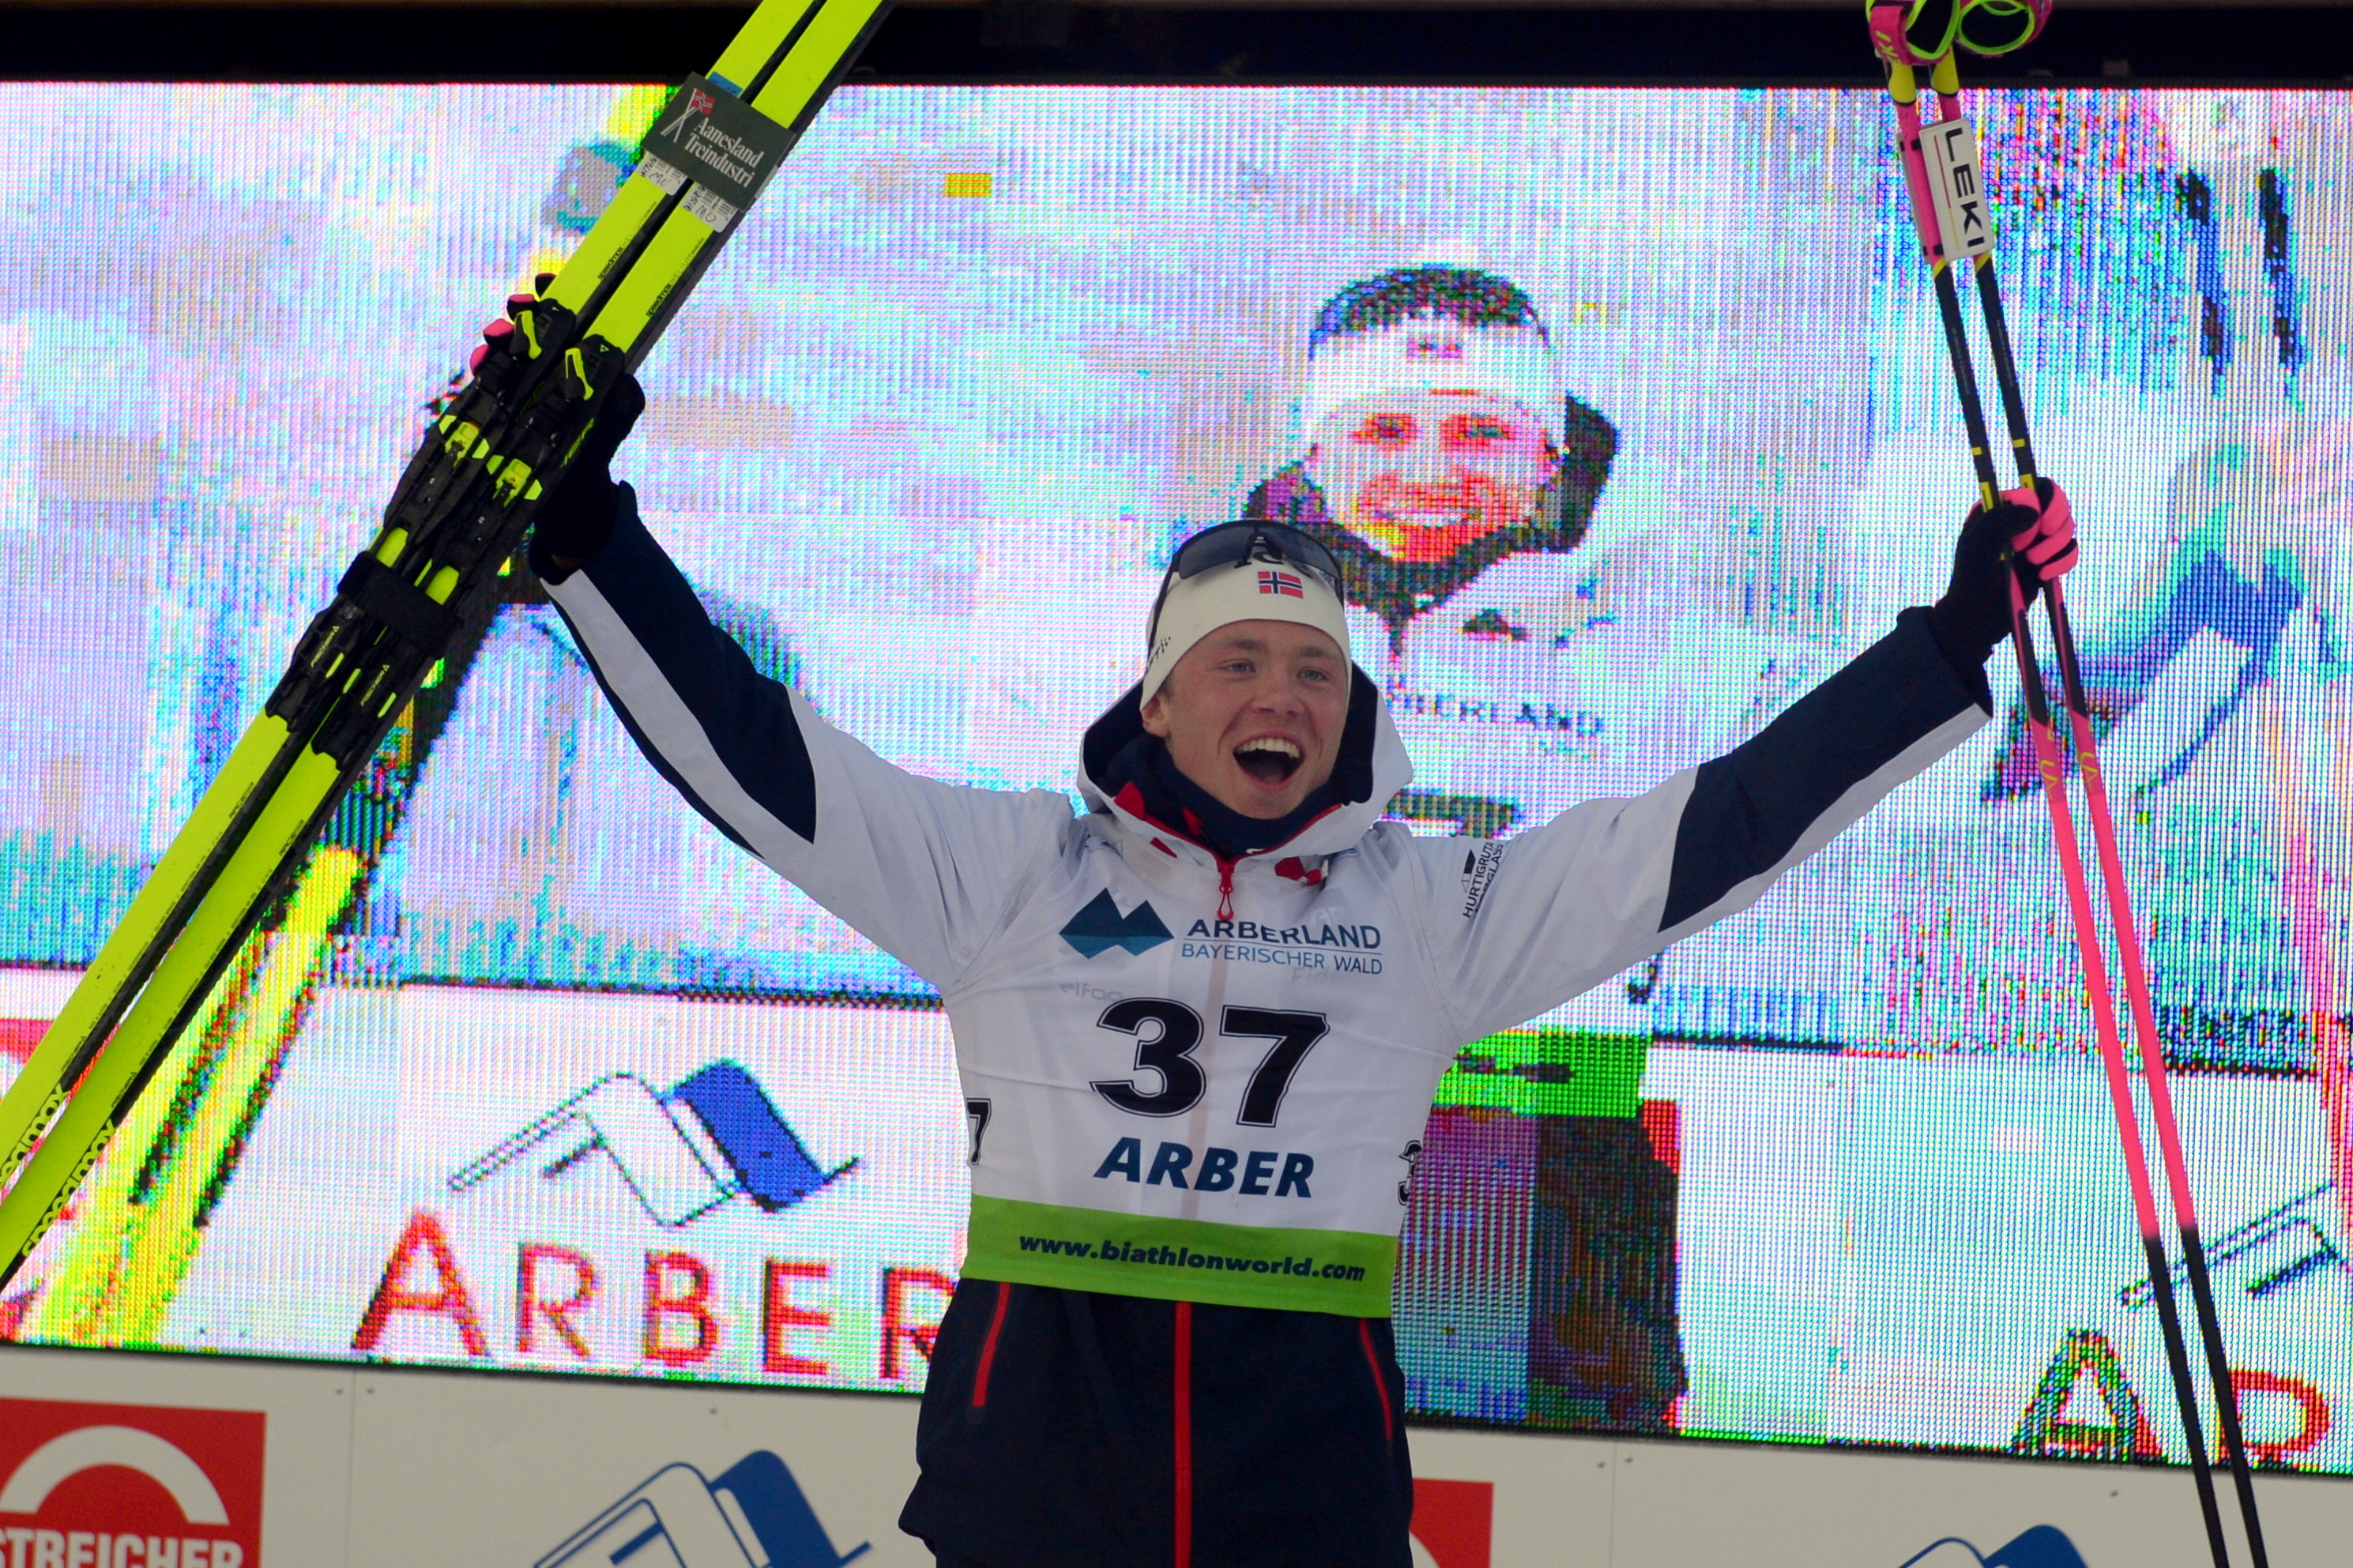 Uldal and Auchentaller win Sprint 1 in Arber